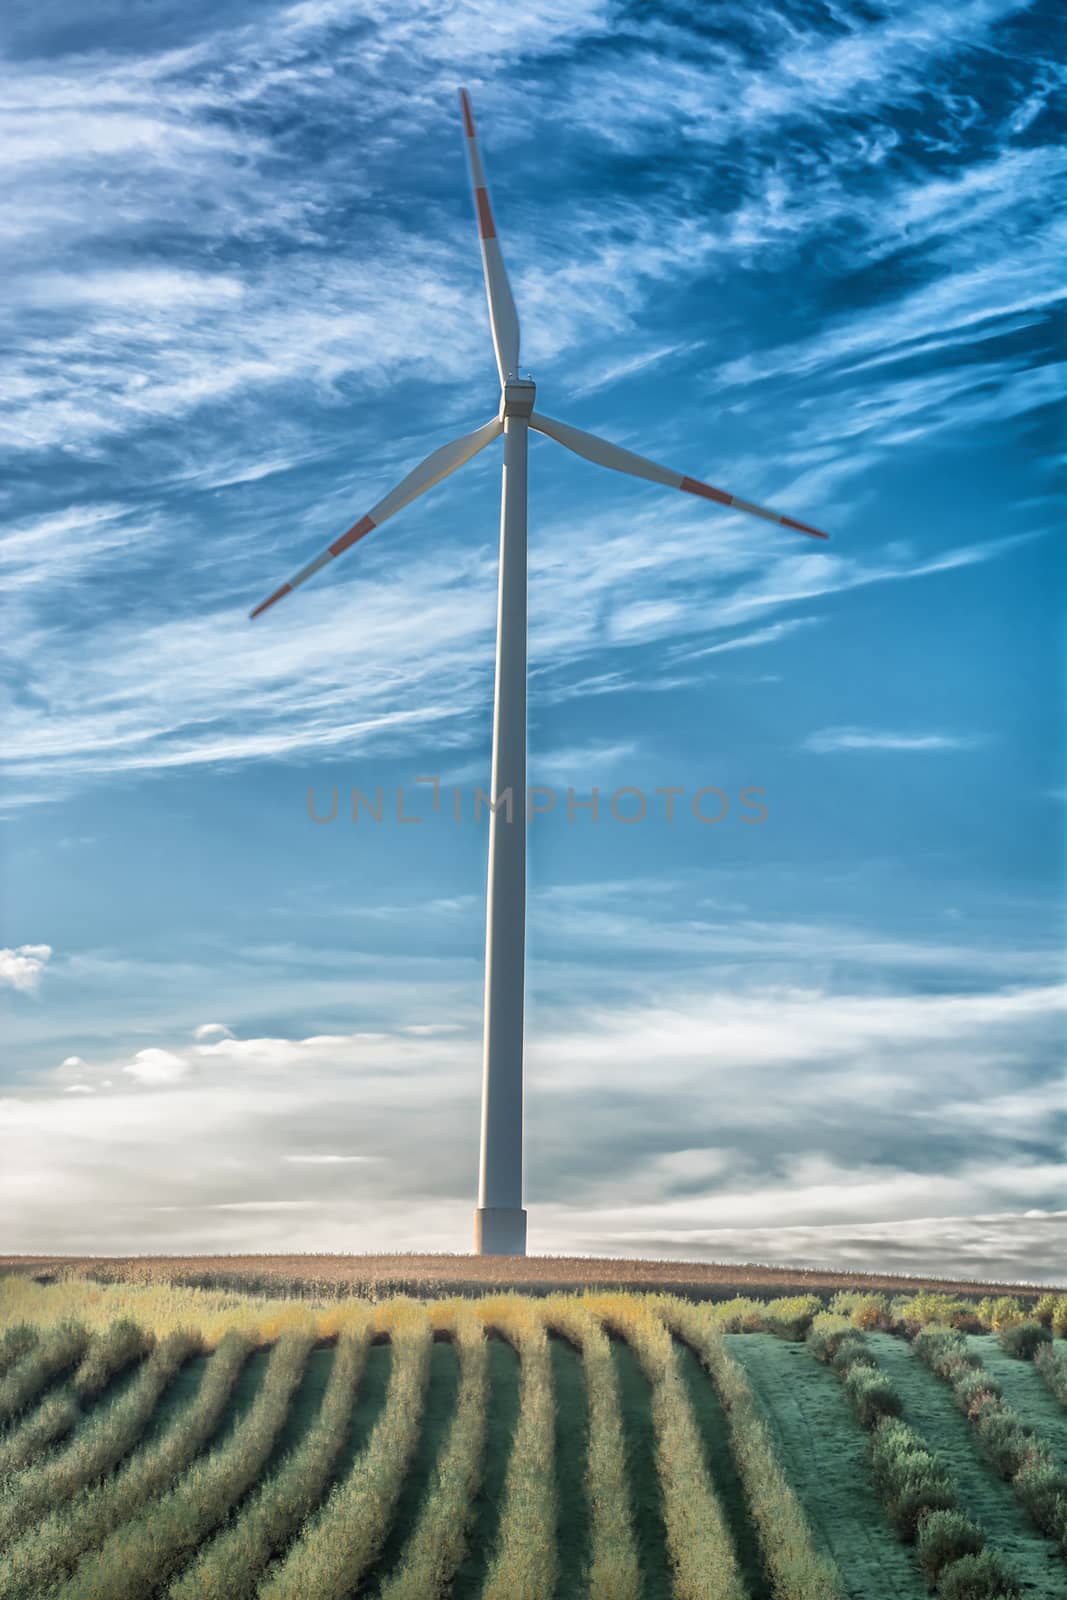 Landscape panorama with wind turbine     by JFsPic